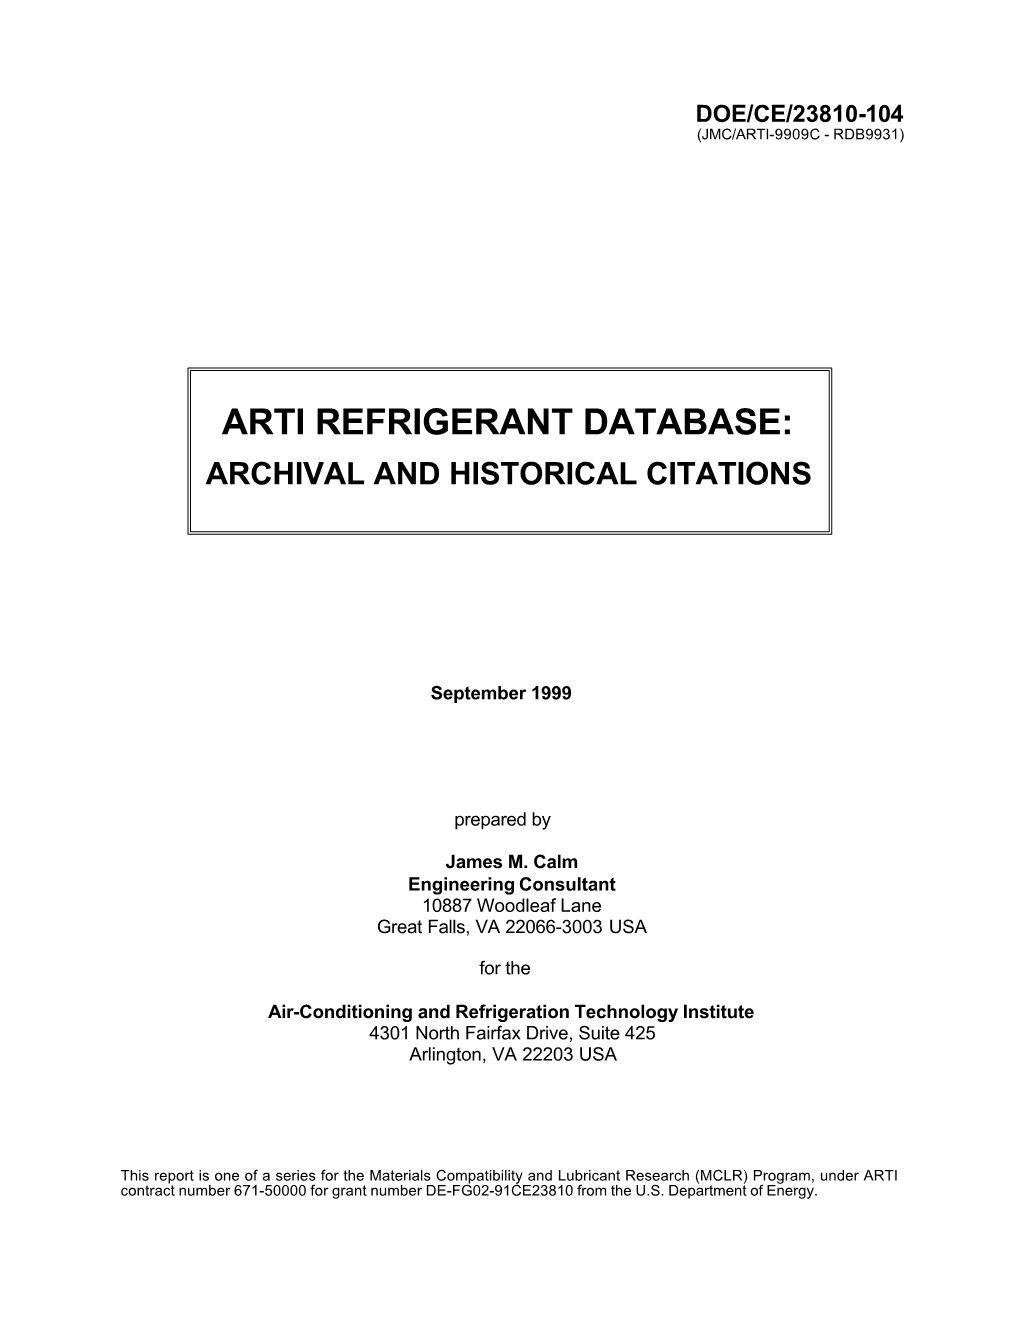 Arti Refrigerant Database: Archival and Historical Citations